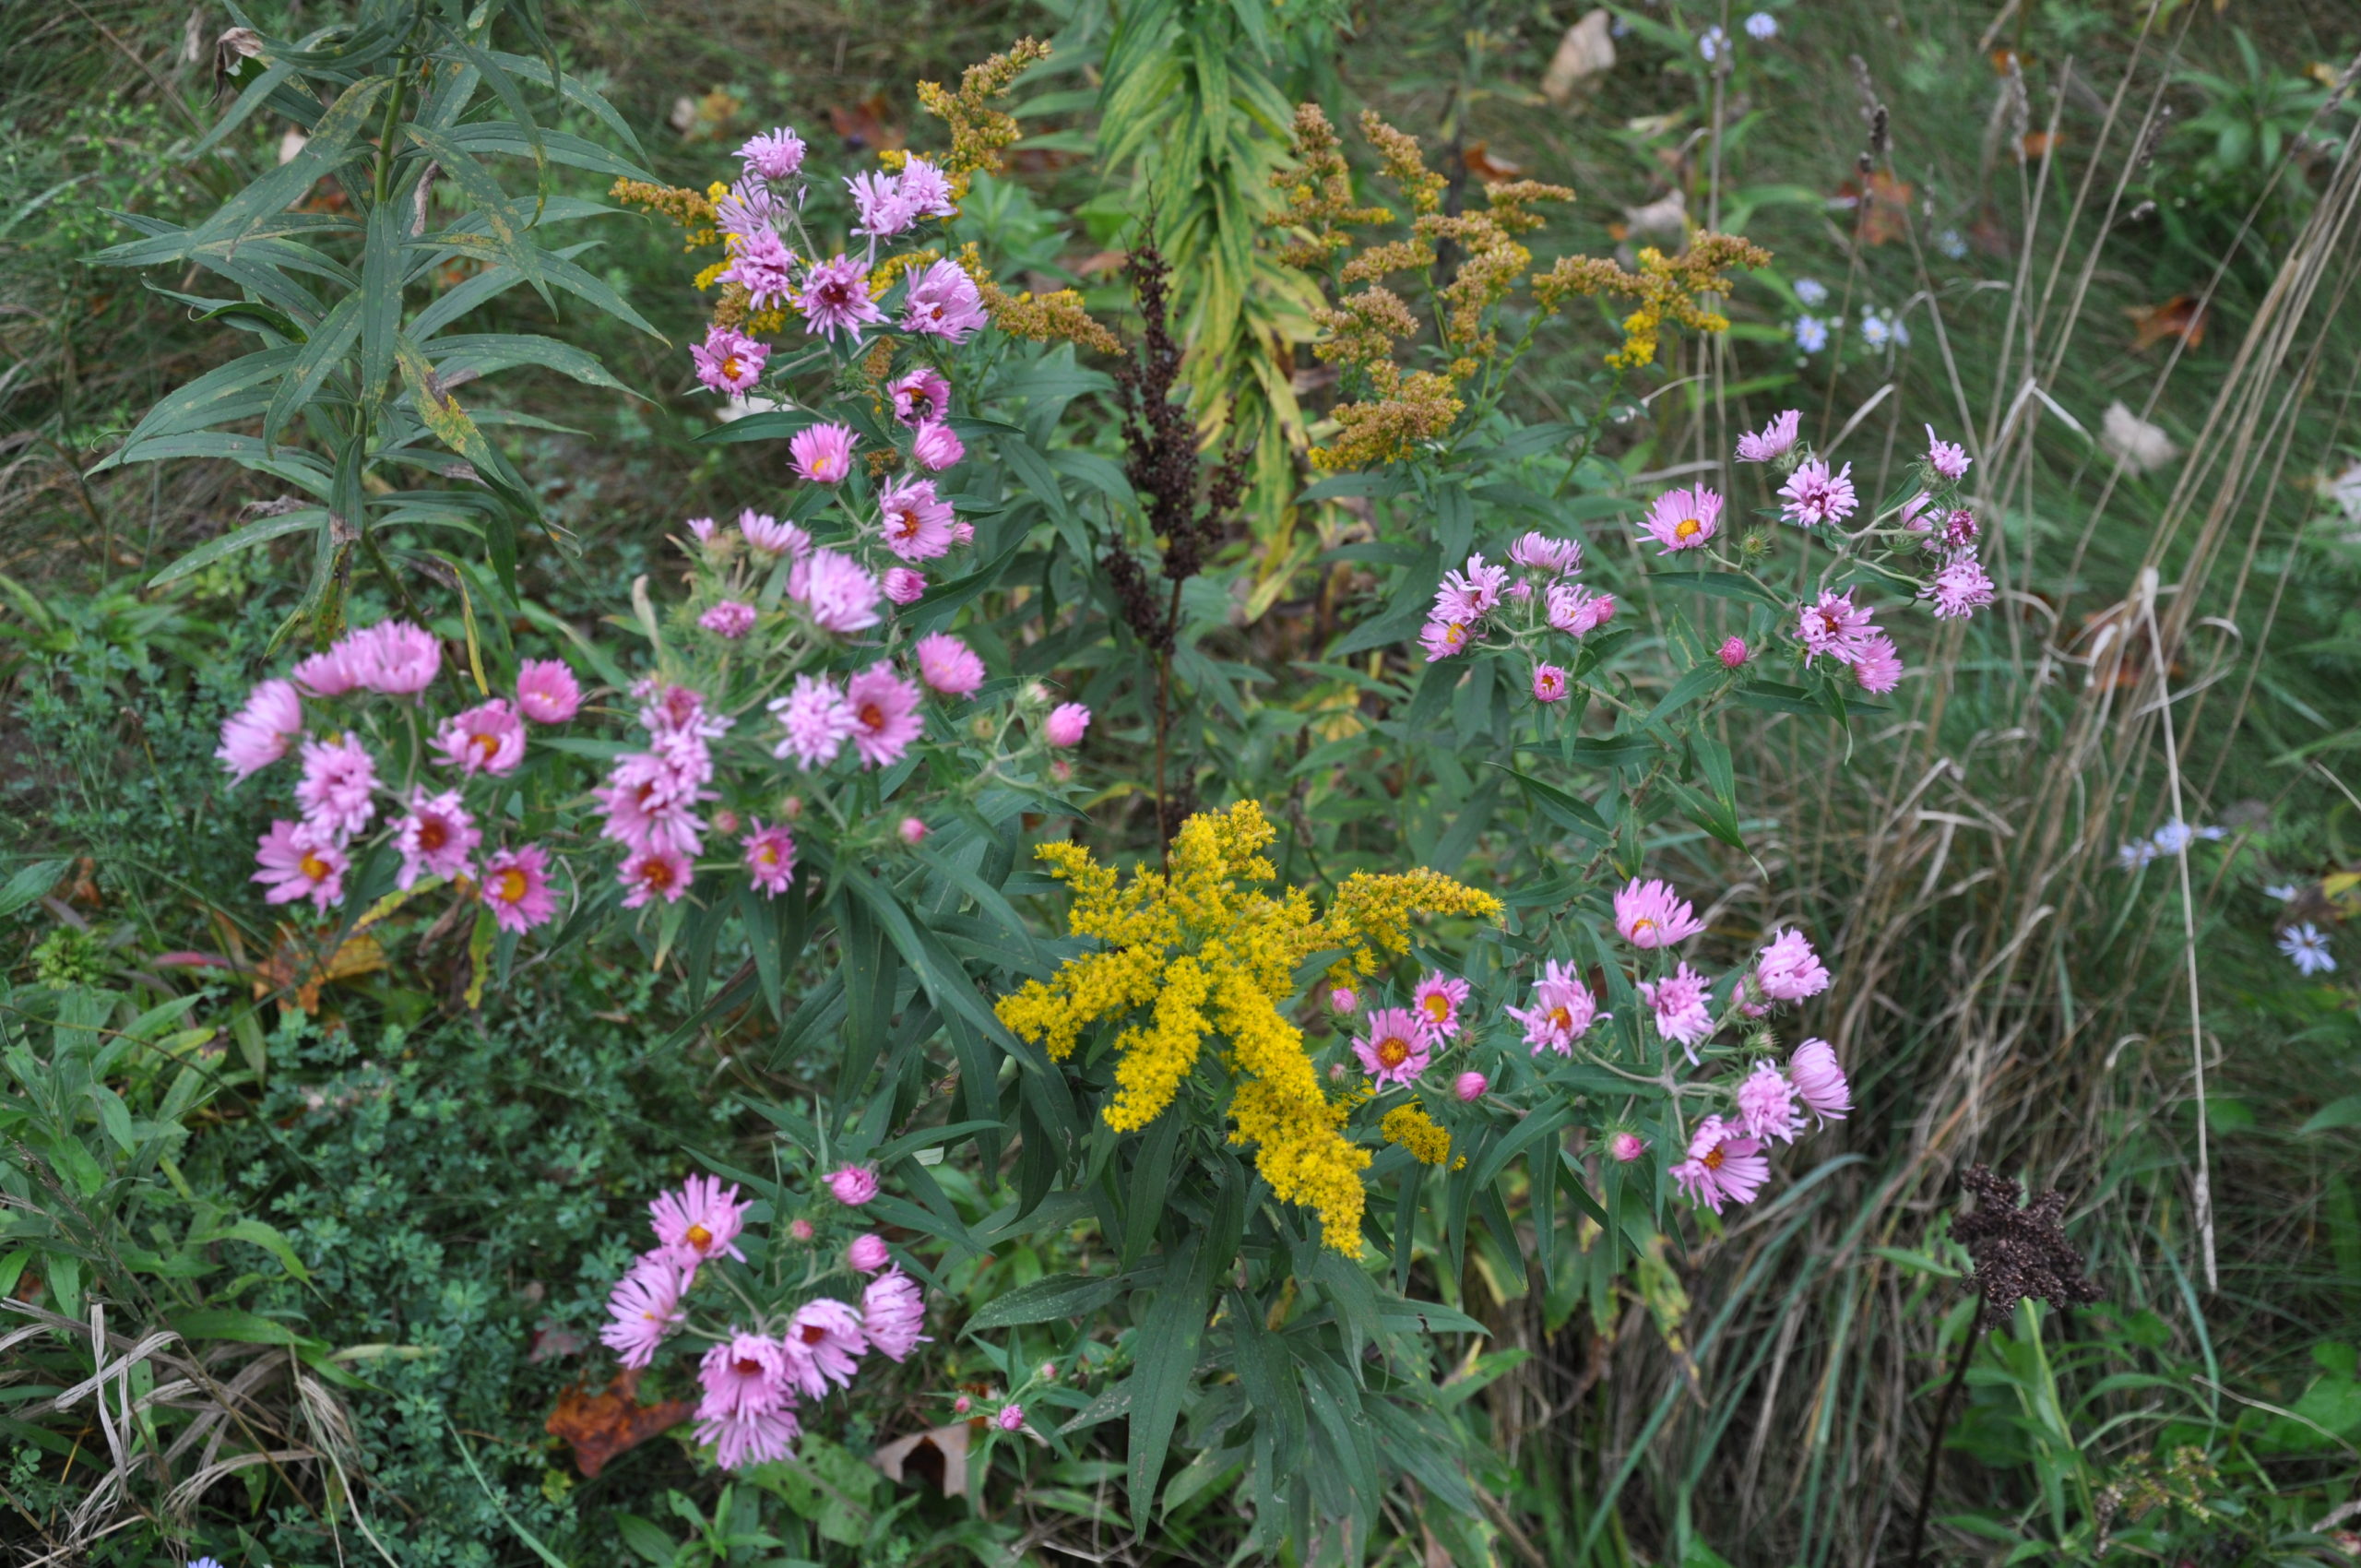 Asters are often found growing along side Solidago (soldenrod) and the tamed varieties of both plants make great fall combinations for garden plantings.  Both also make good cuts.